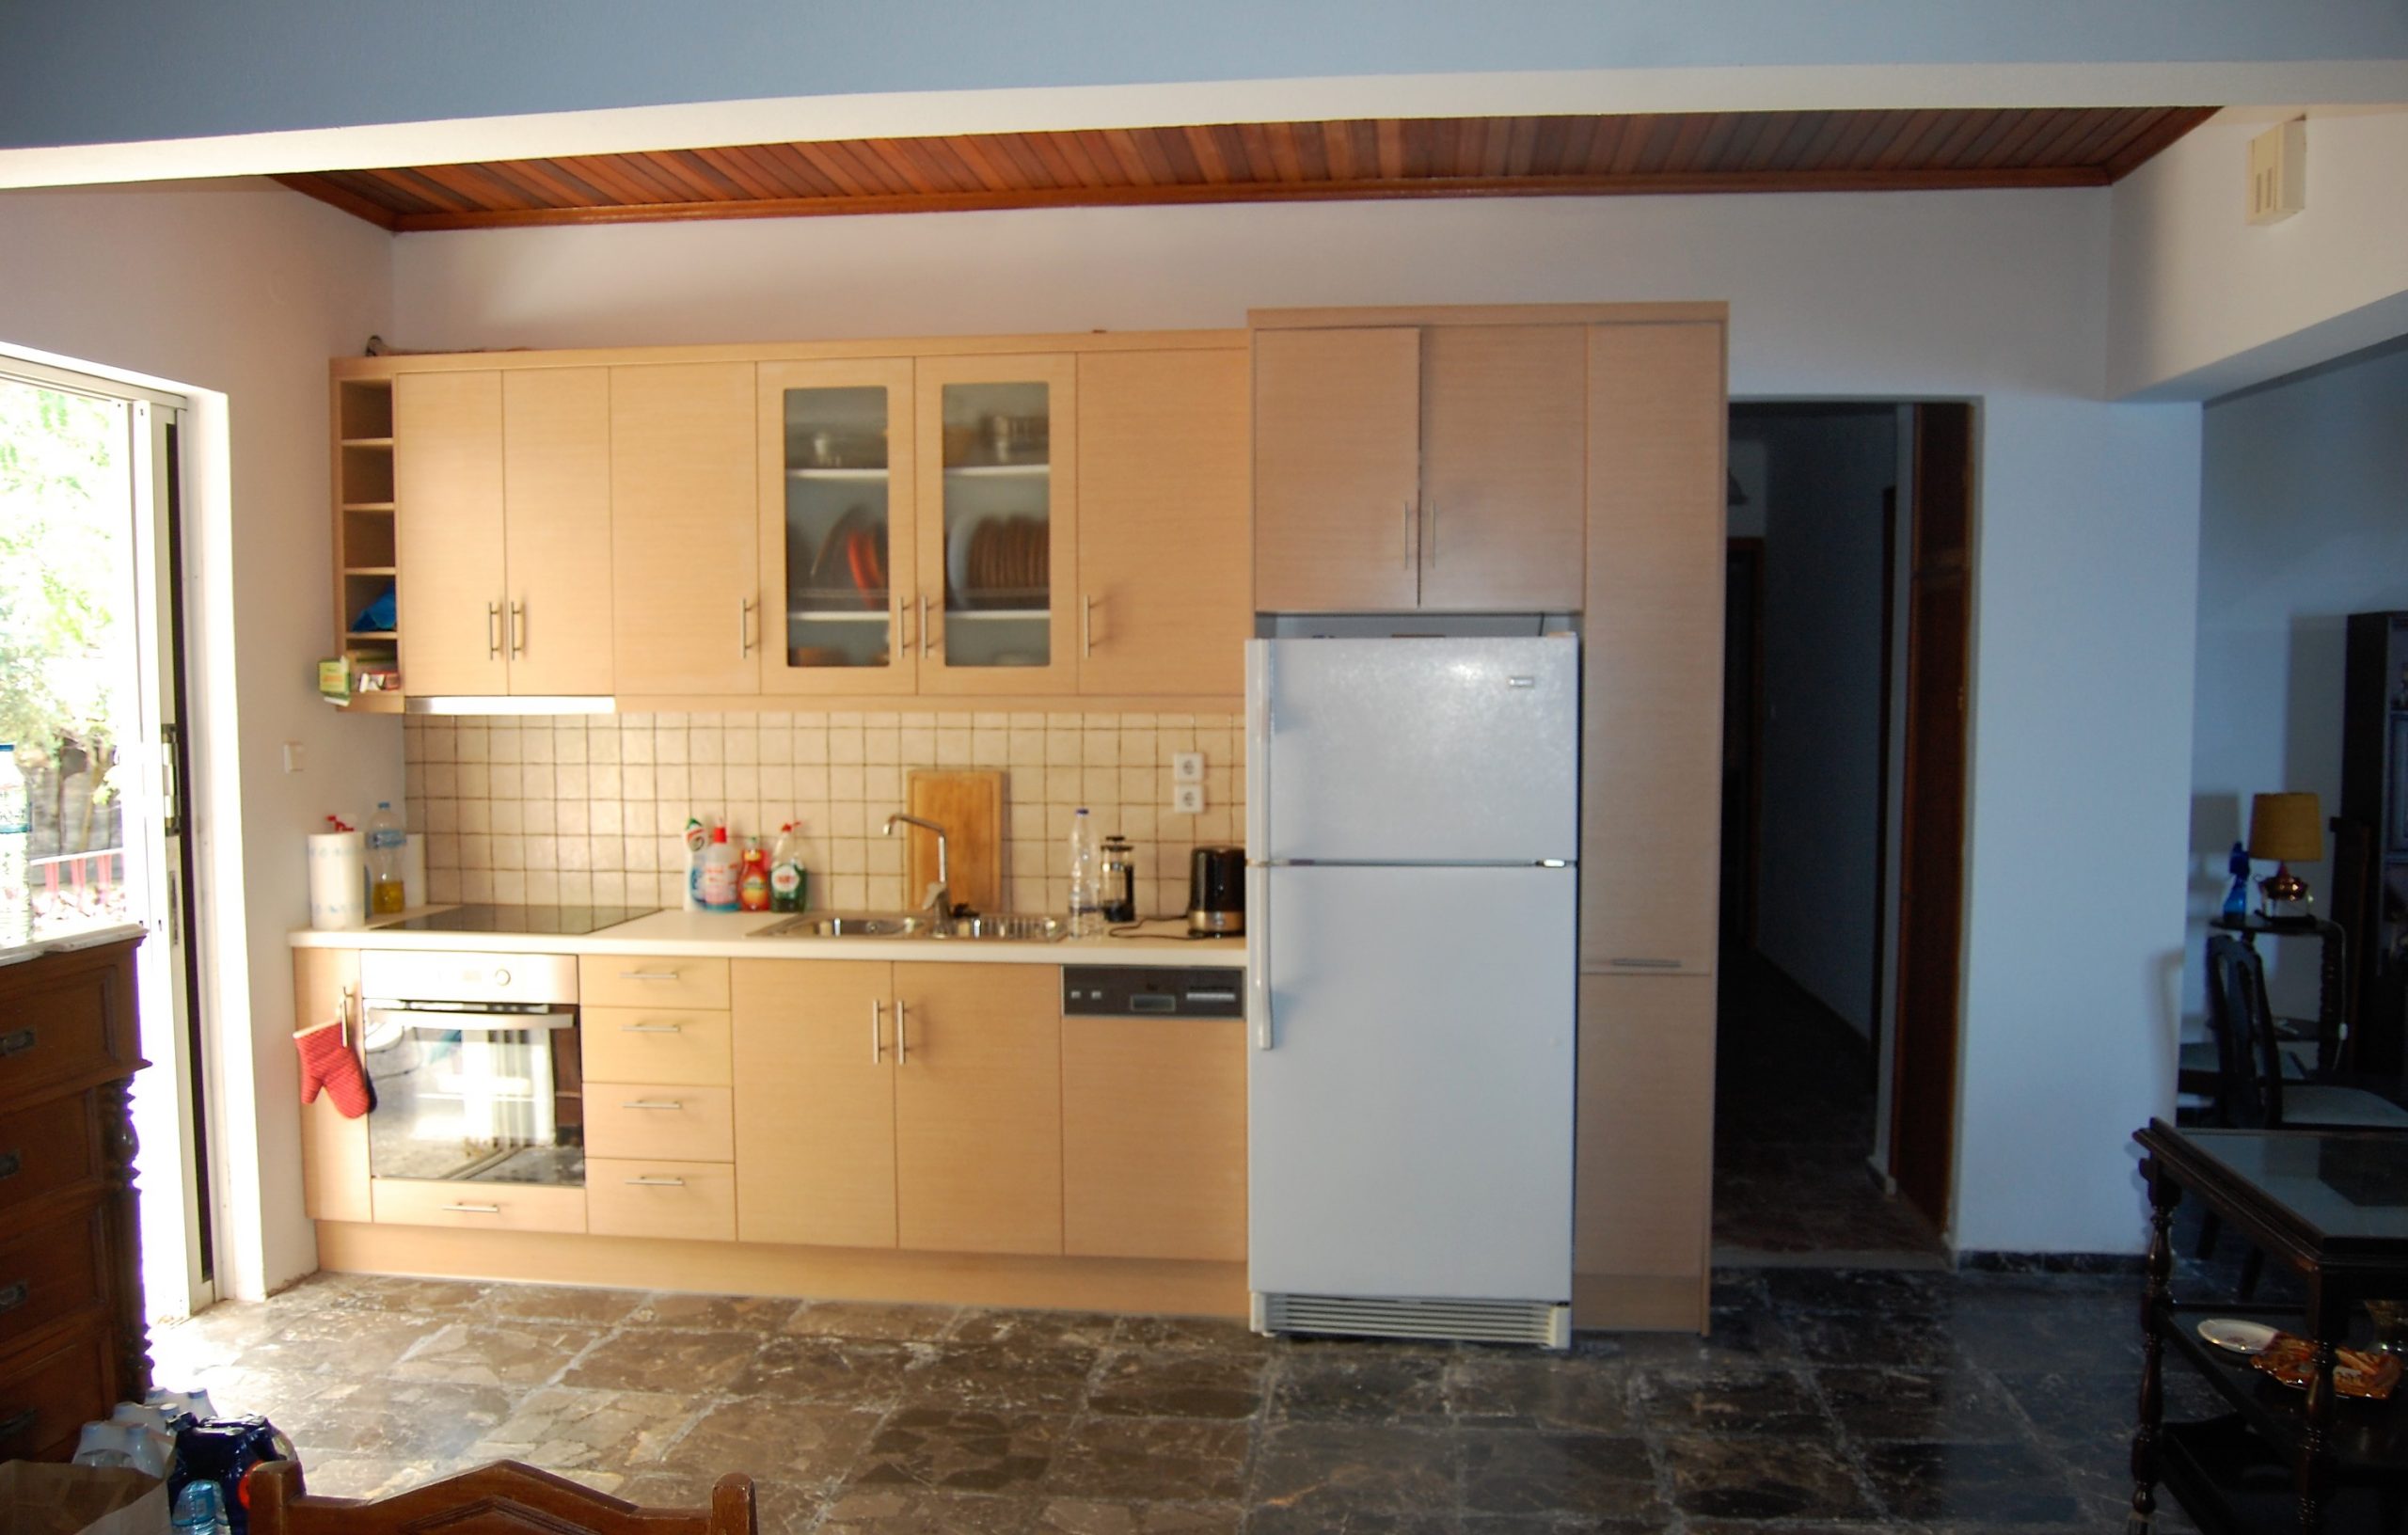 Kitchen of house for sale in Ithaca Greece Lefki